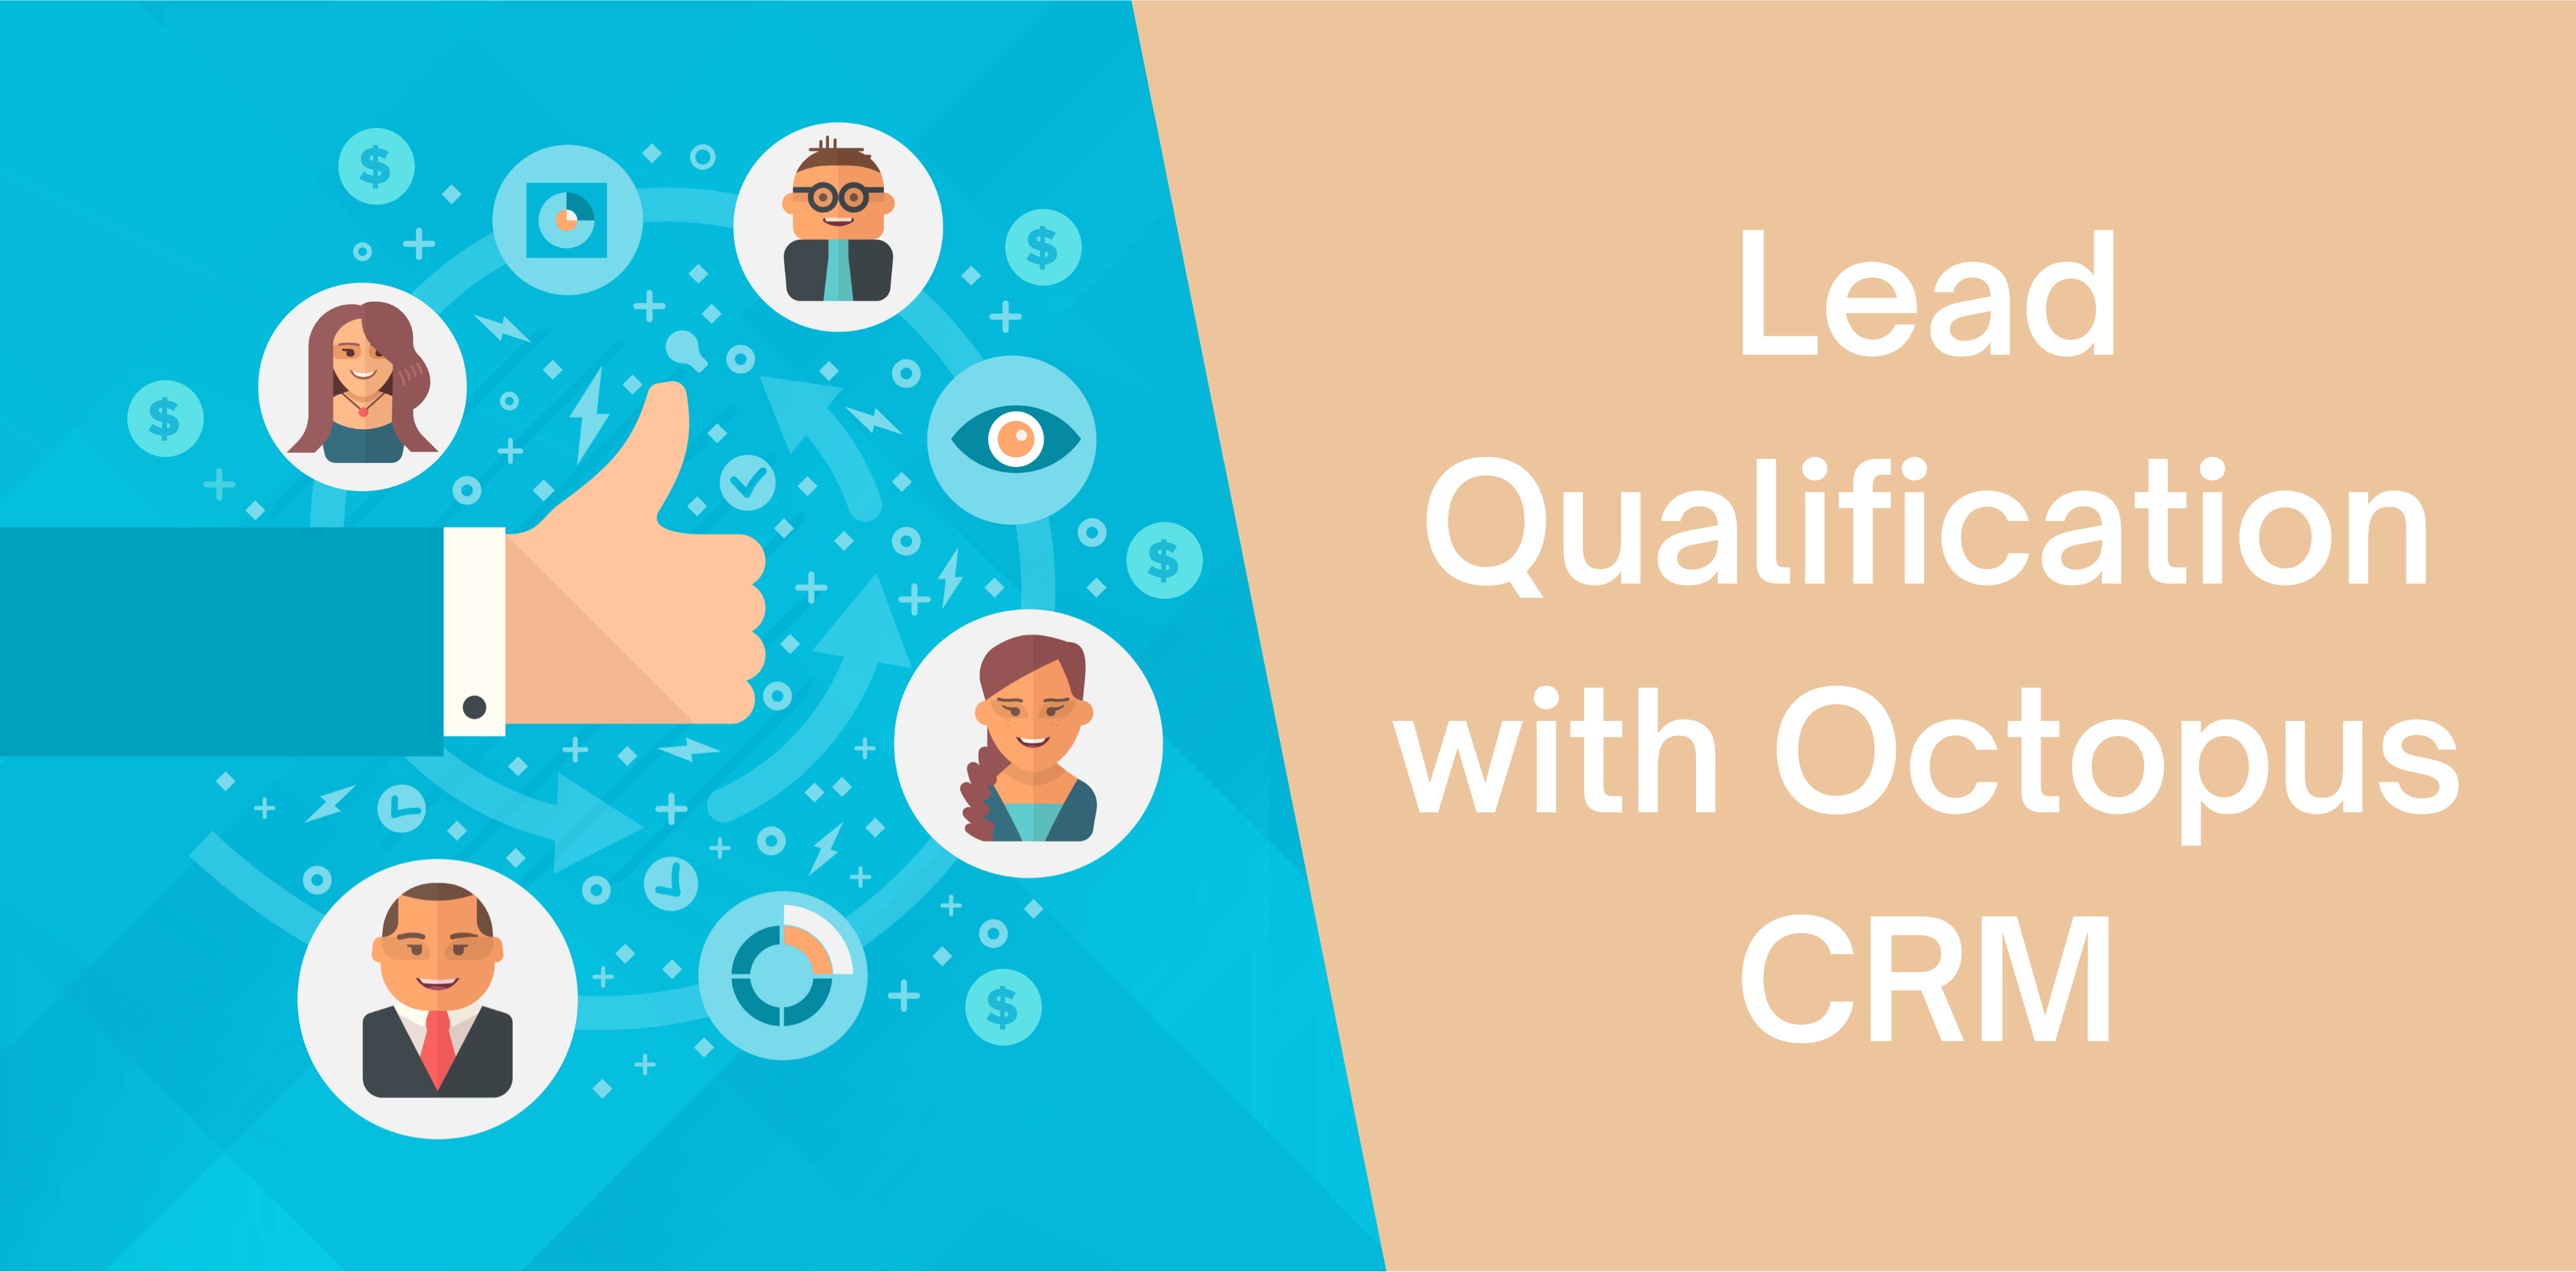 Lead Qualification with Octopus CRM Octopus CRM